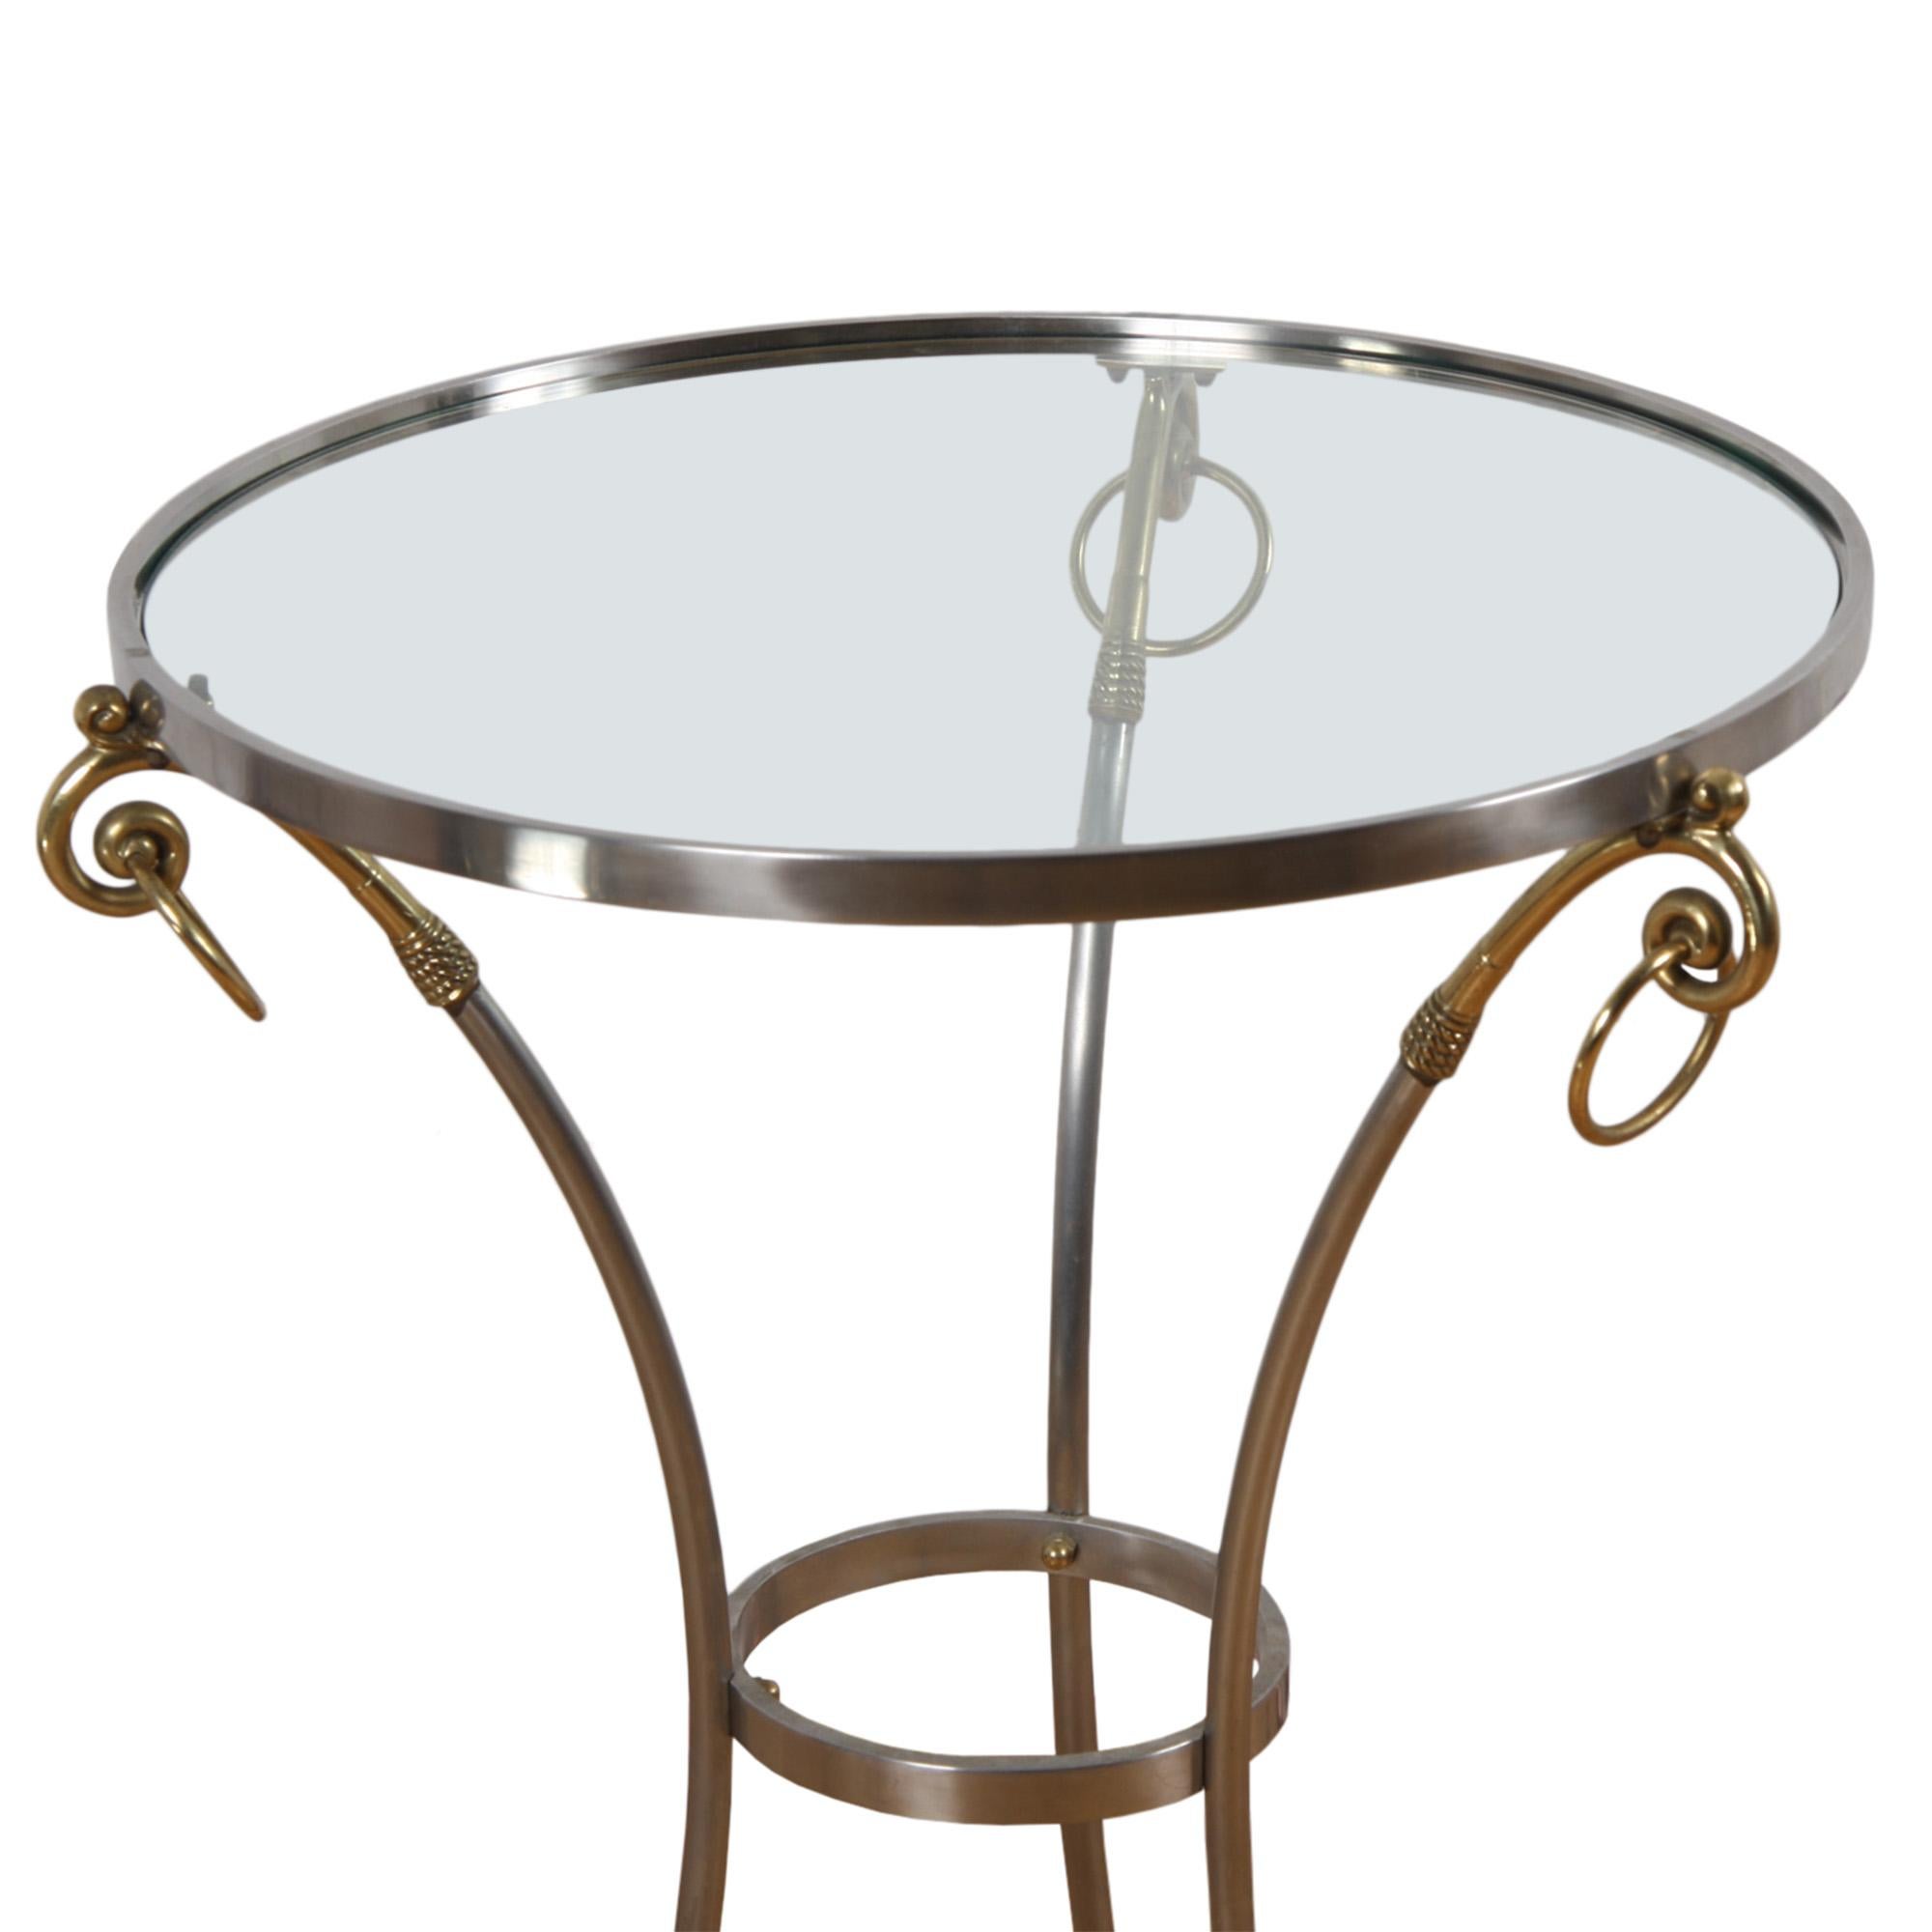 An empire style circular, glass topped side table made from brass and steel. The feet are formed from cloven hooves on the tripod stand. 

French, 1960s.

Dimensions: to confirm - the base is 46cm across, the diameter of the top is 54cm.